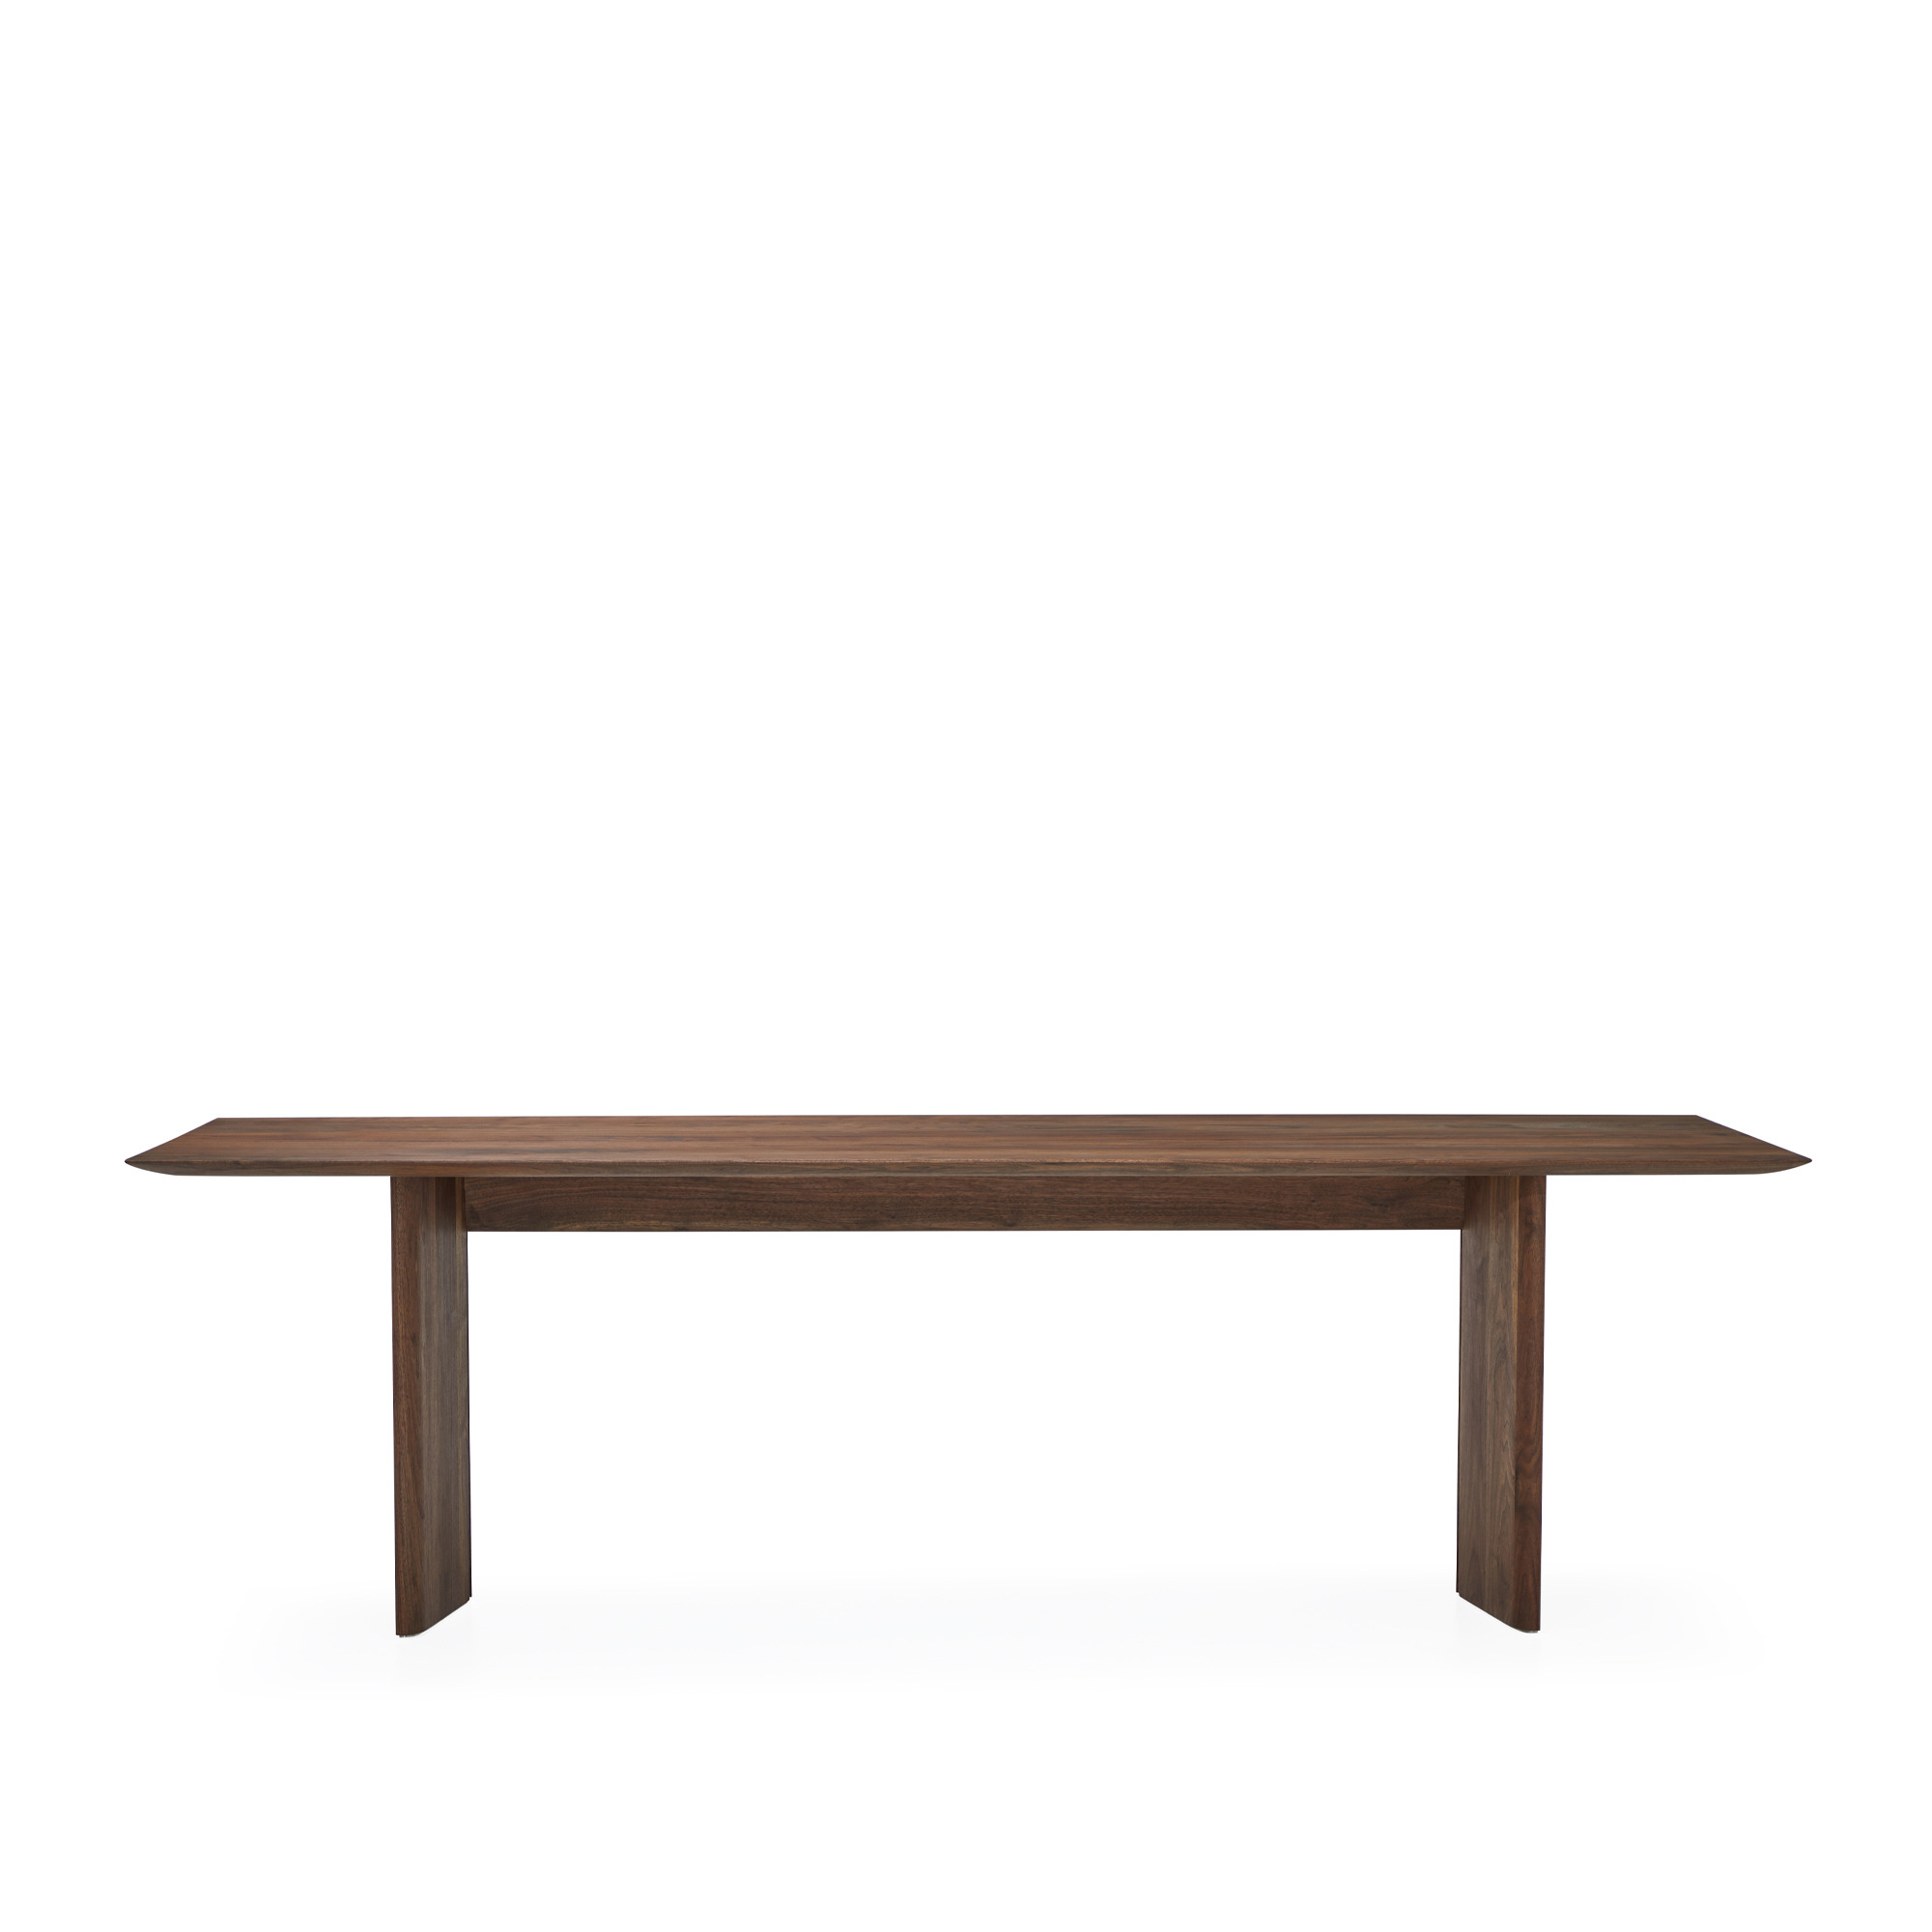 GN2 Table in Black American Walnut By The Conran Shop